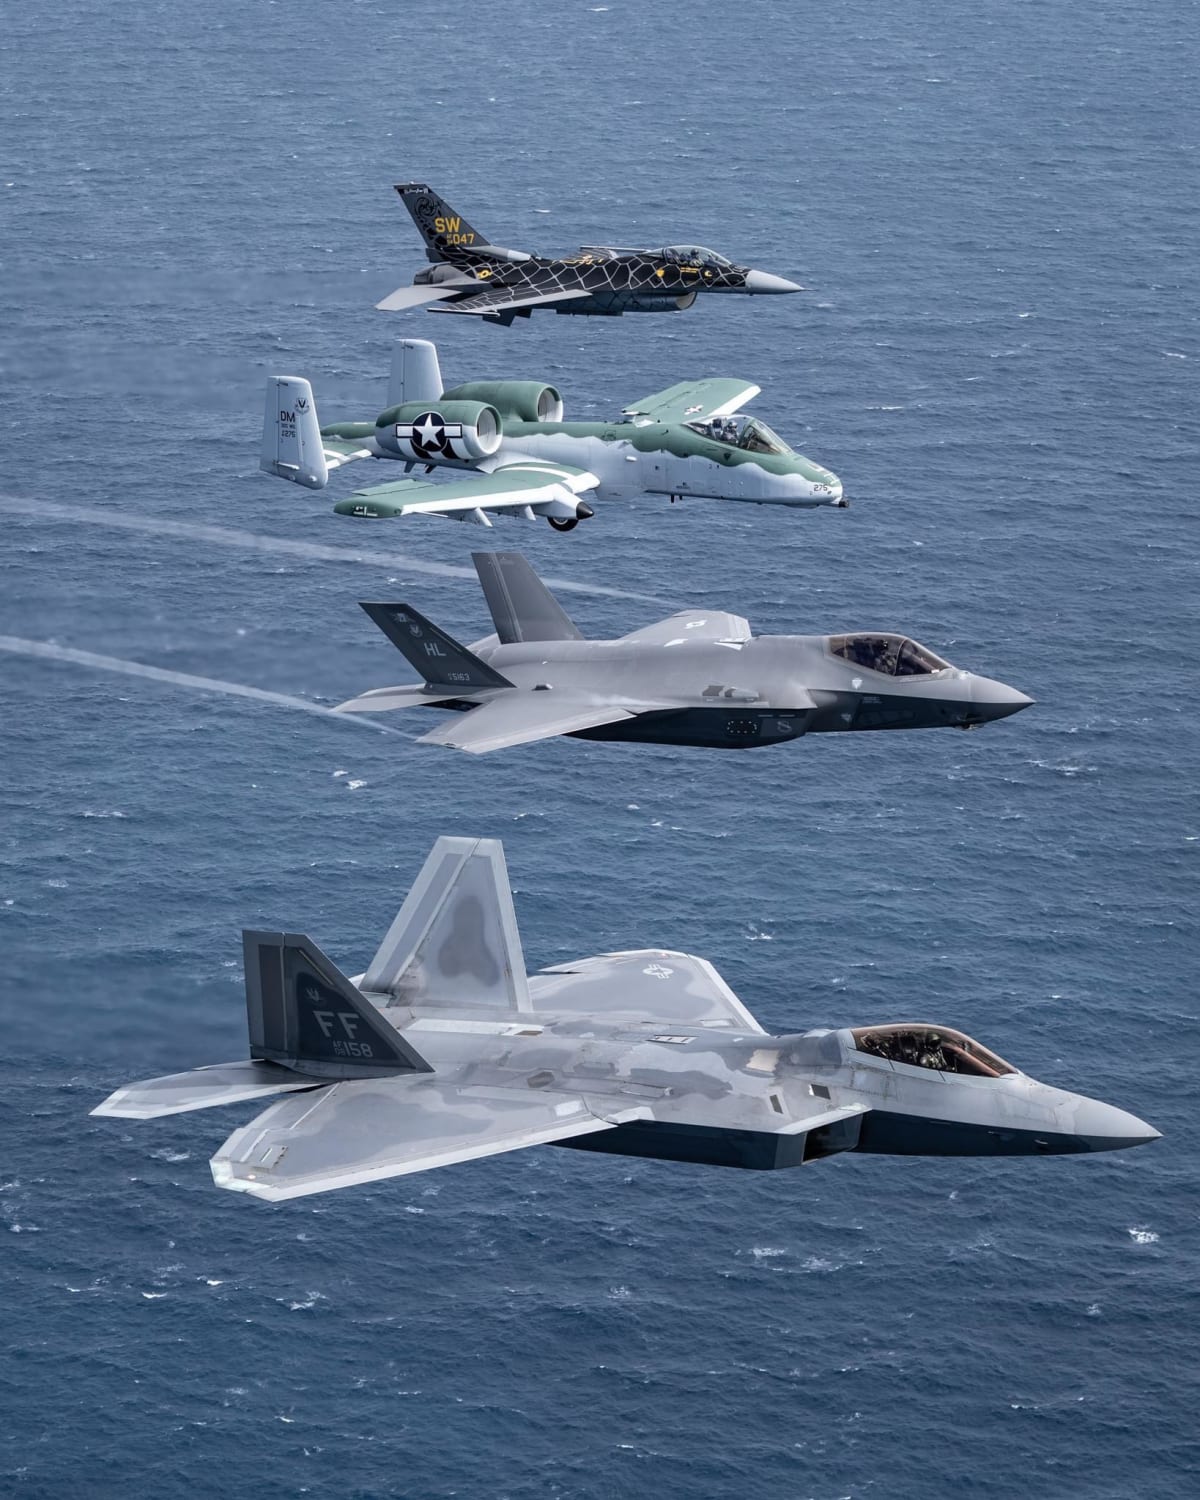 All four Air Force demo teams got together for a photo